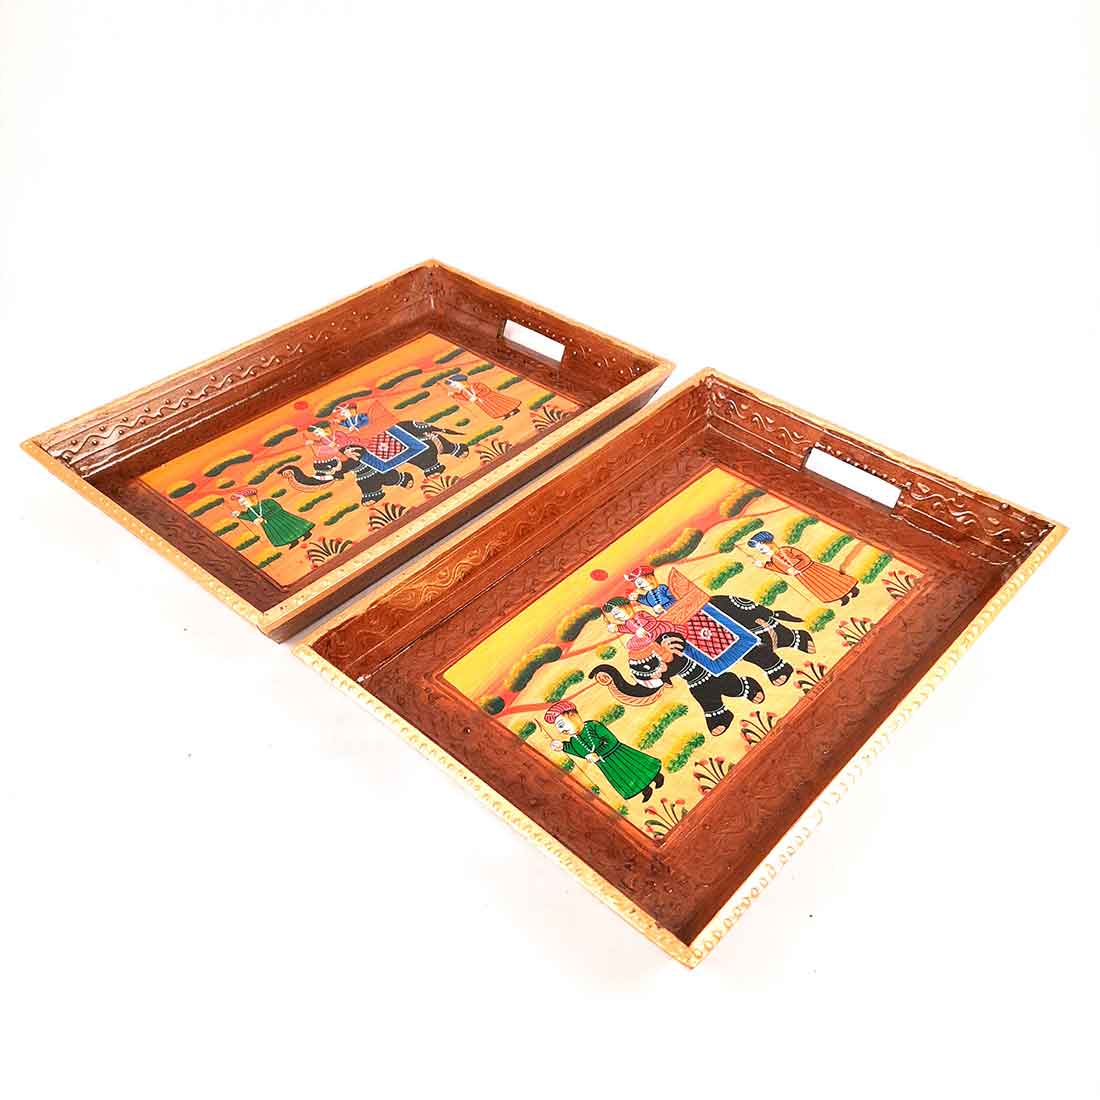 Serving Wooden Tray | Decorative Tray - for Kitchen, Serving & Gifting - 13 Inch - Apkamart#Style_Pack of 2